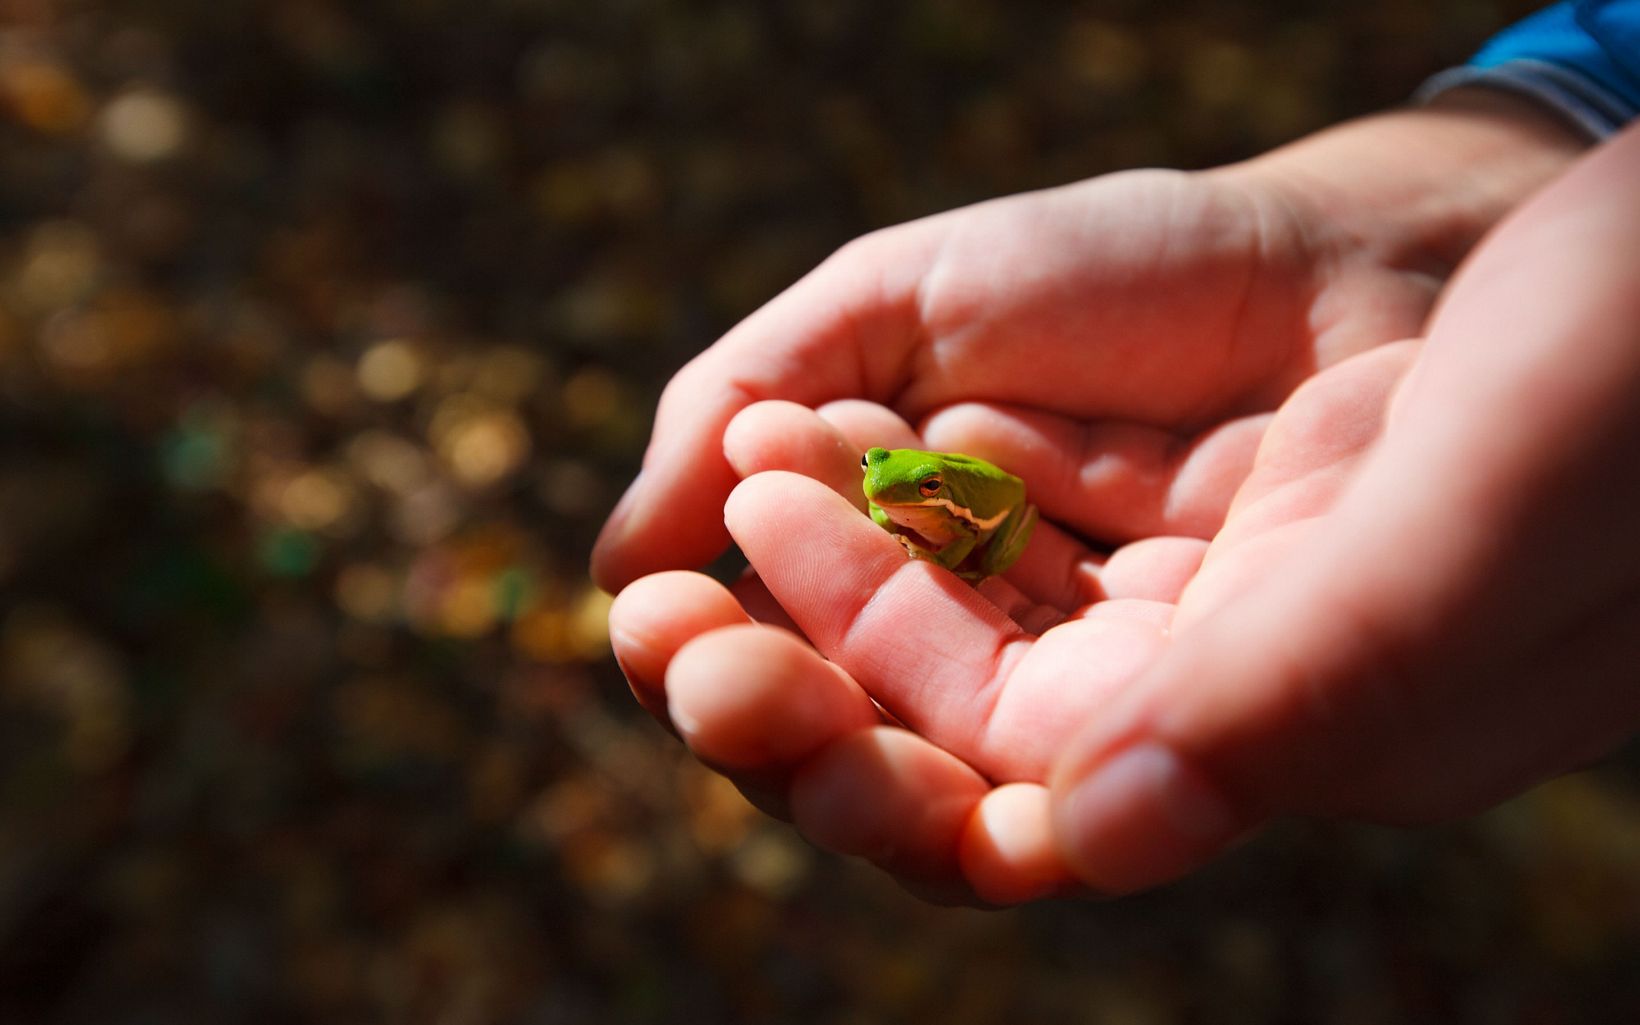 Closeup of hands holding a tiny green frog.